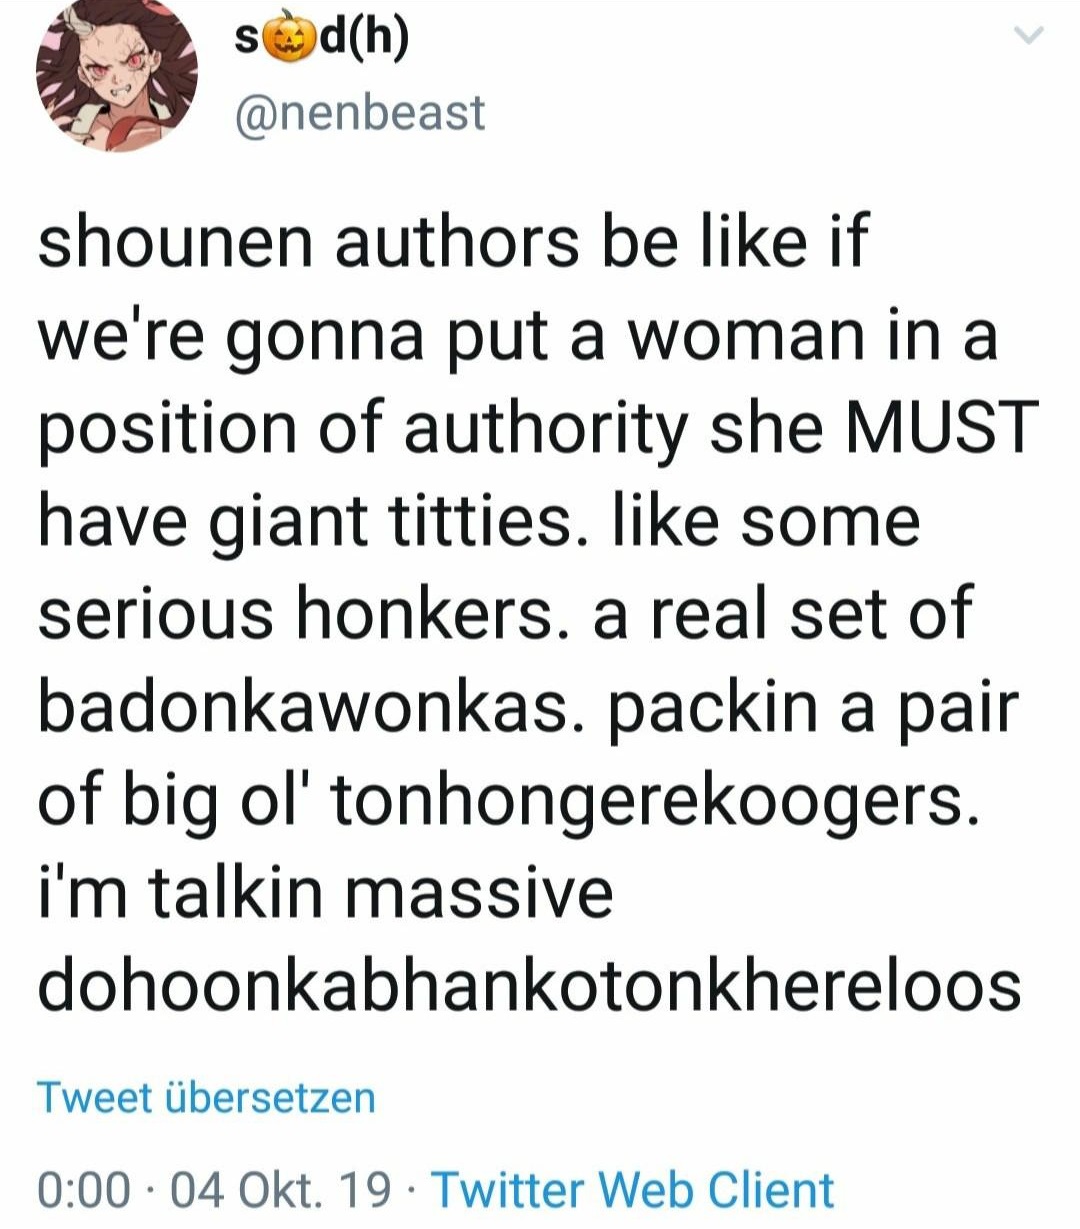 date extension for tax audit - sedh shounen authors be if we're gonna put a woman in a position of authority she Must have giant titties. some serious honkers. a real set of badonkawonkas. packin a pair of big ol' tonhongerekoogers. i'm talkin massive doh